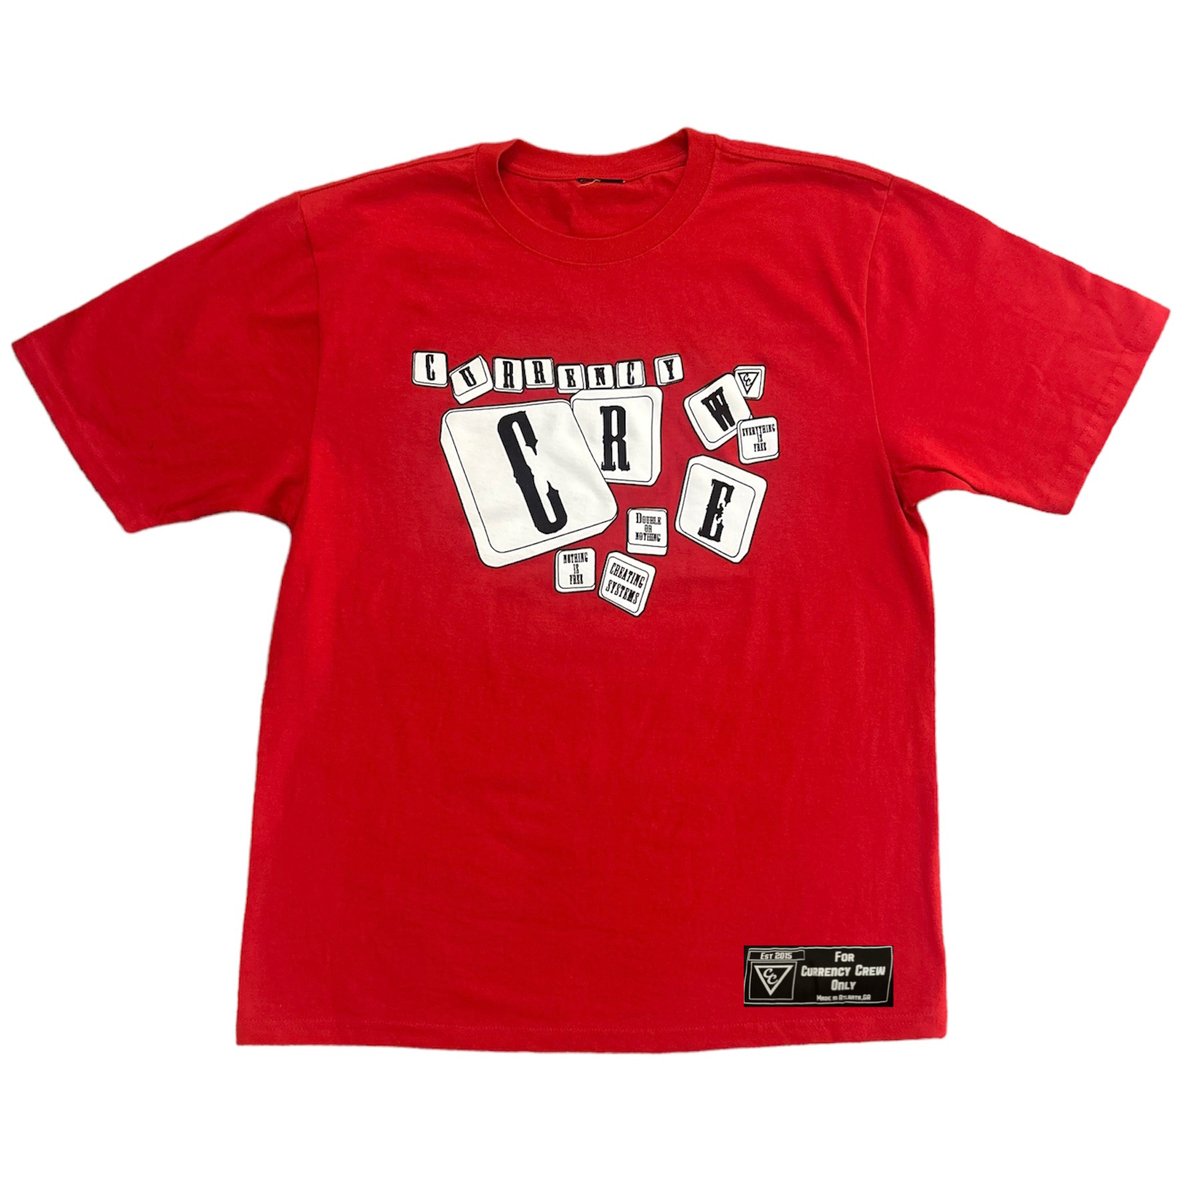 Image of Currency Crew Scrabble Tee Red